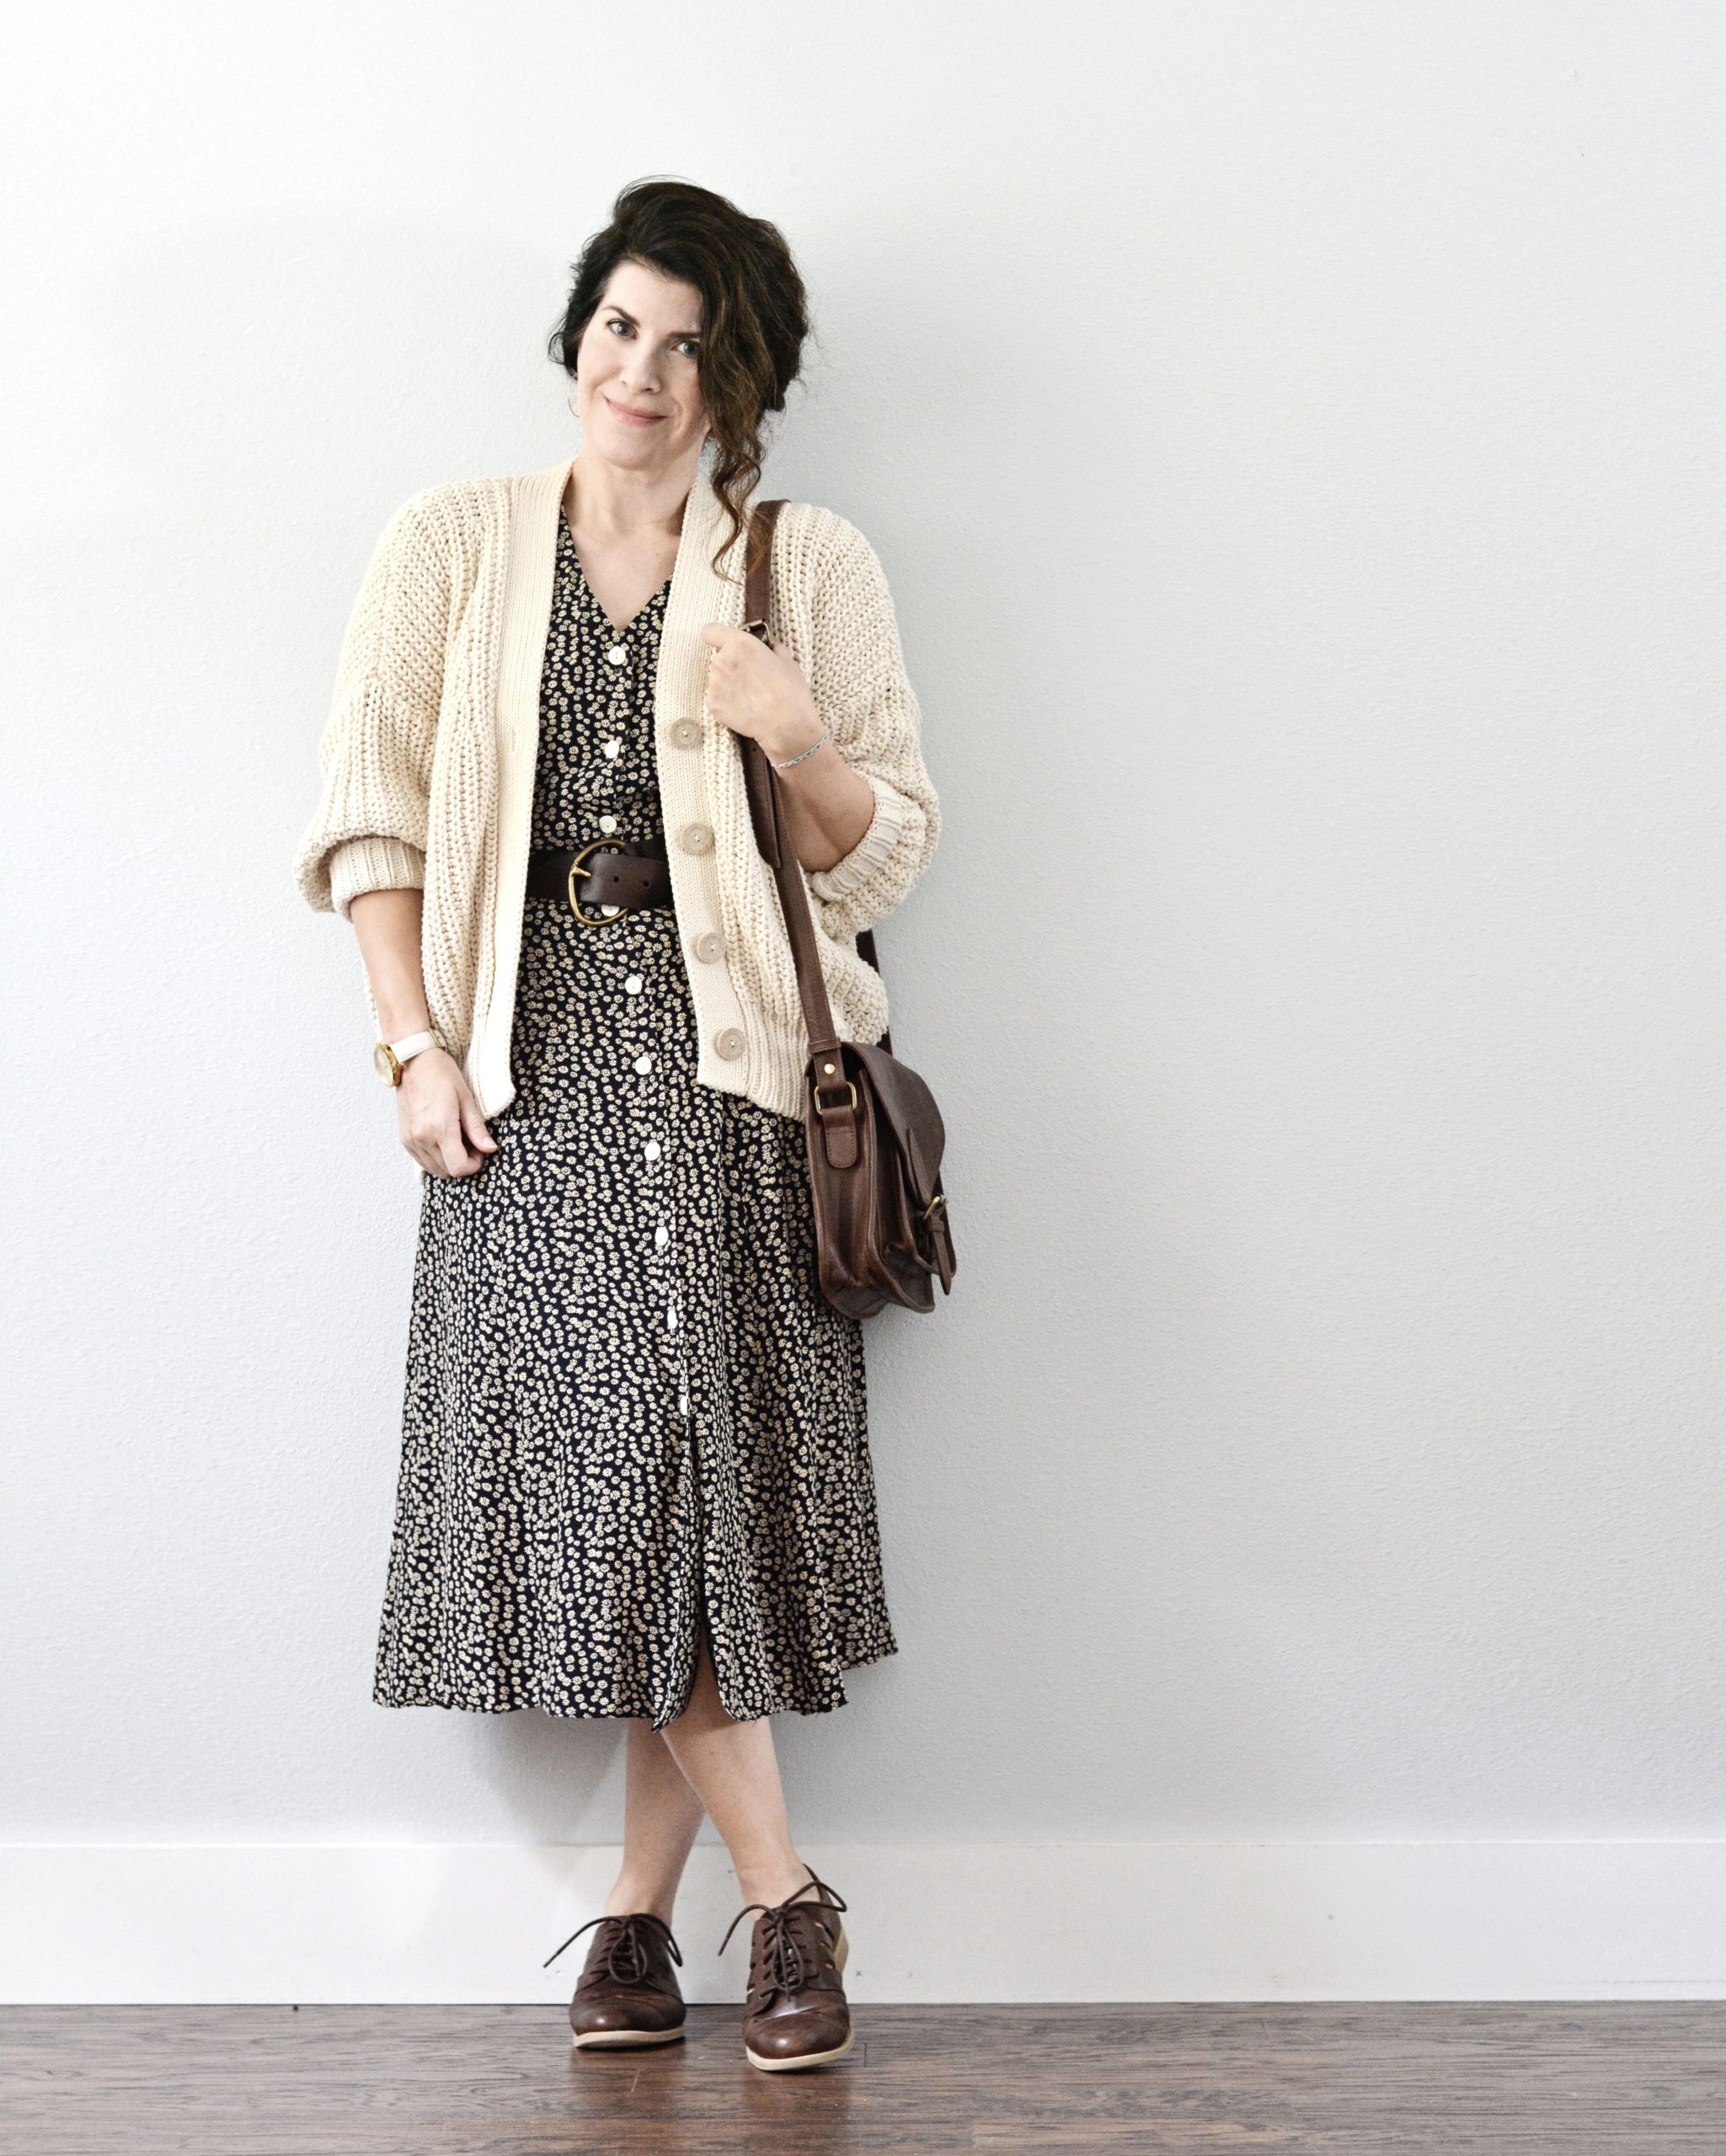 A woman standing against a light grey wall is wearing a navy floral dress with small tan flowers and a cream cardigan. You can see part of a brown belt where the cardigan opens and she is wearing brown Oxford shoes and a brown handbag hangs from her left shoulder. Her brown hair is pinned back.